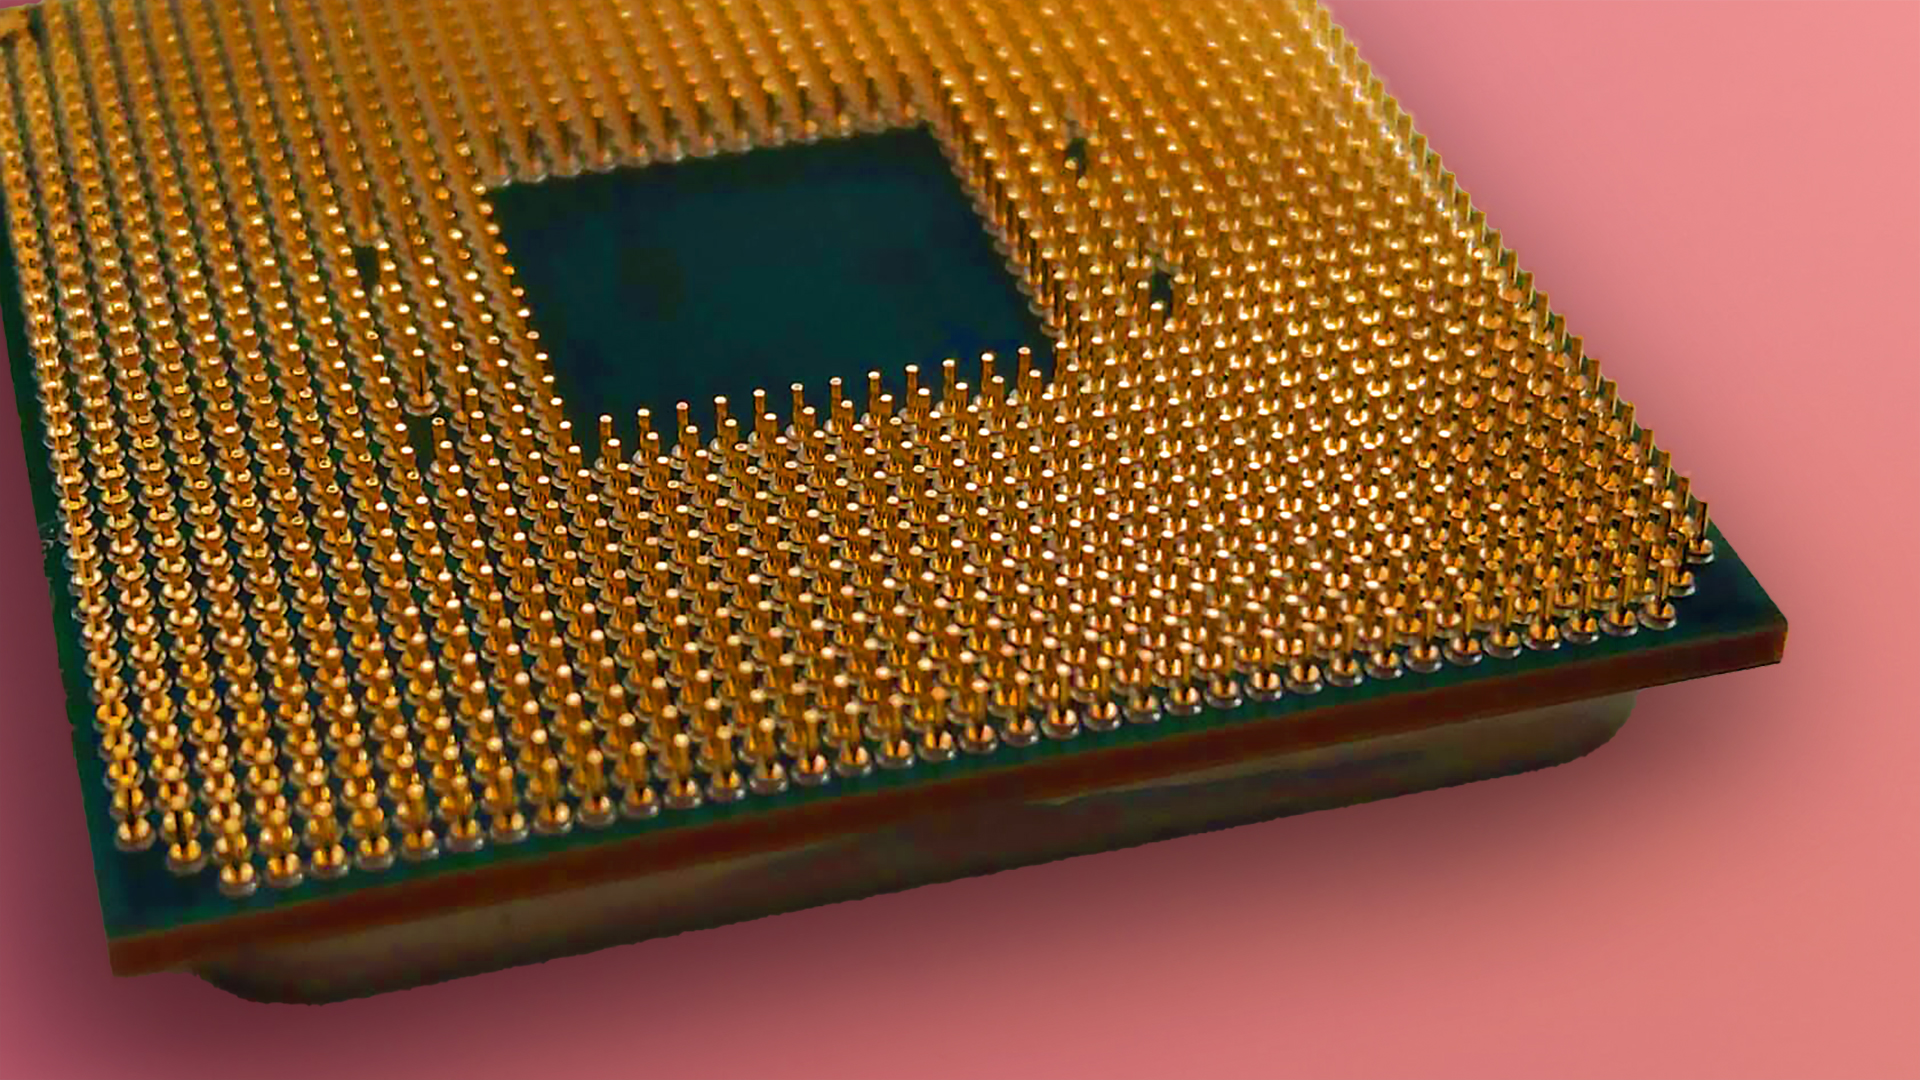  AMD's Zen 2 chips have a security bug that's getting patched between now and 2024 